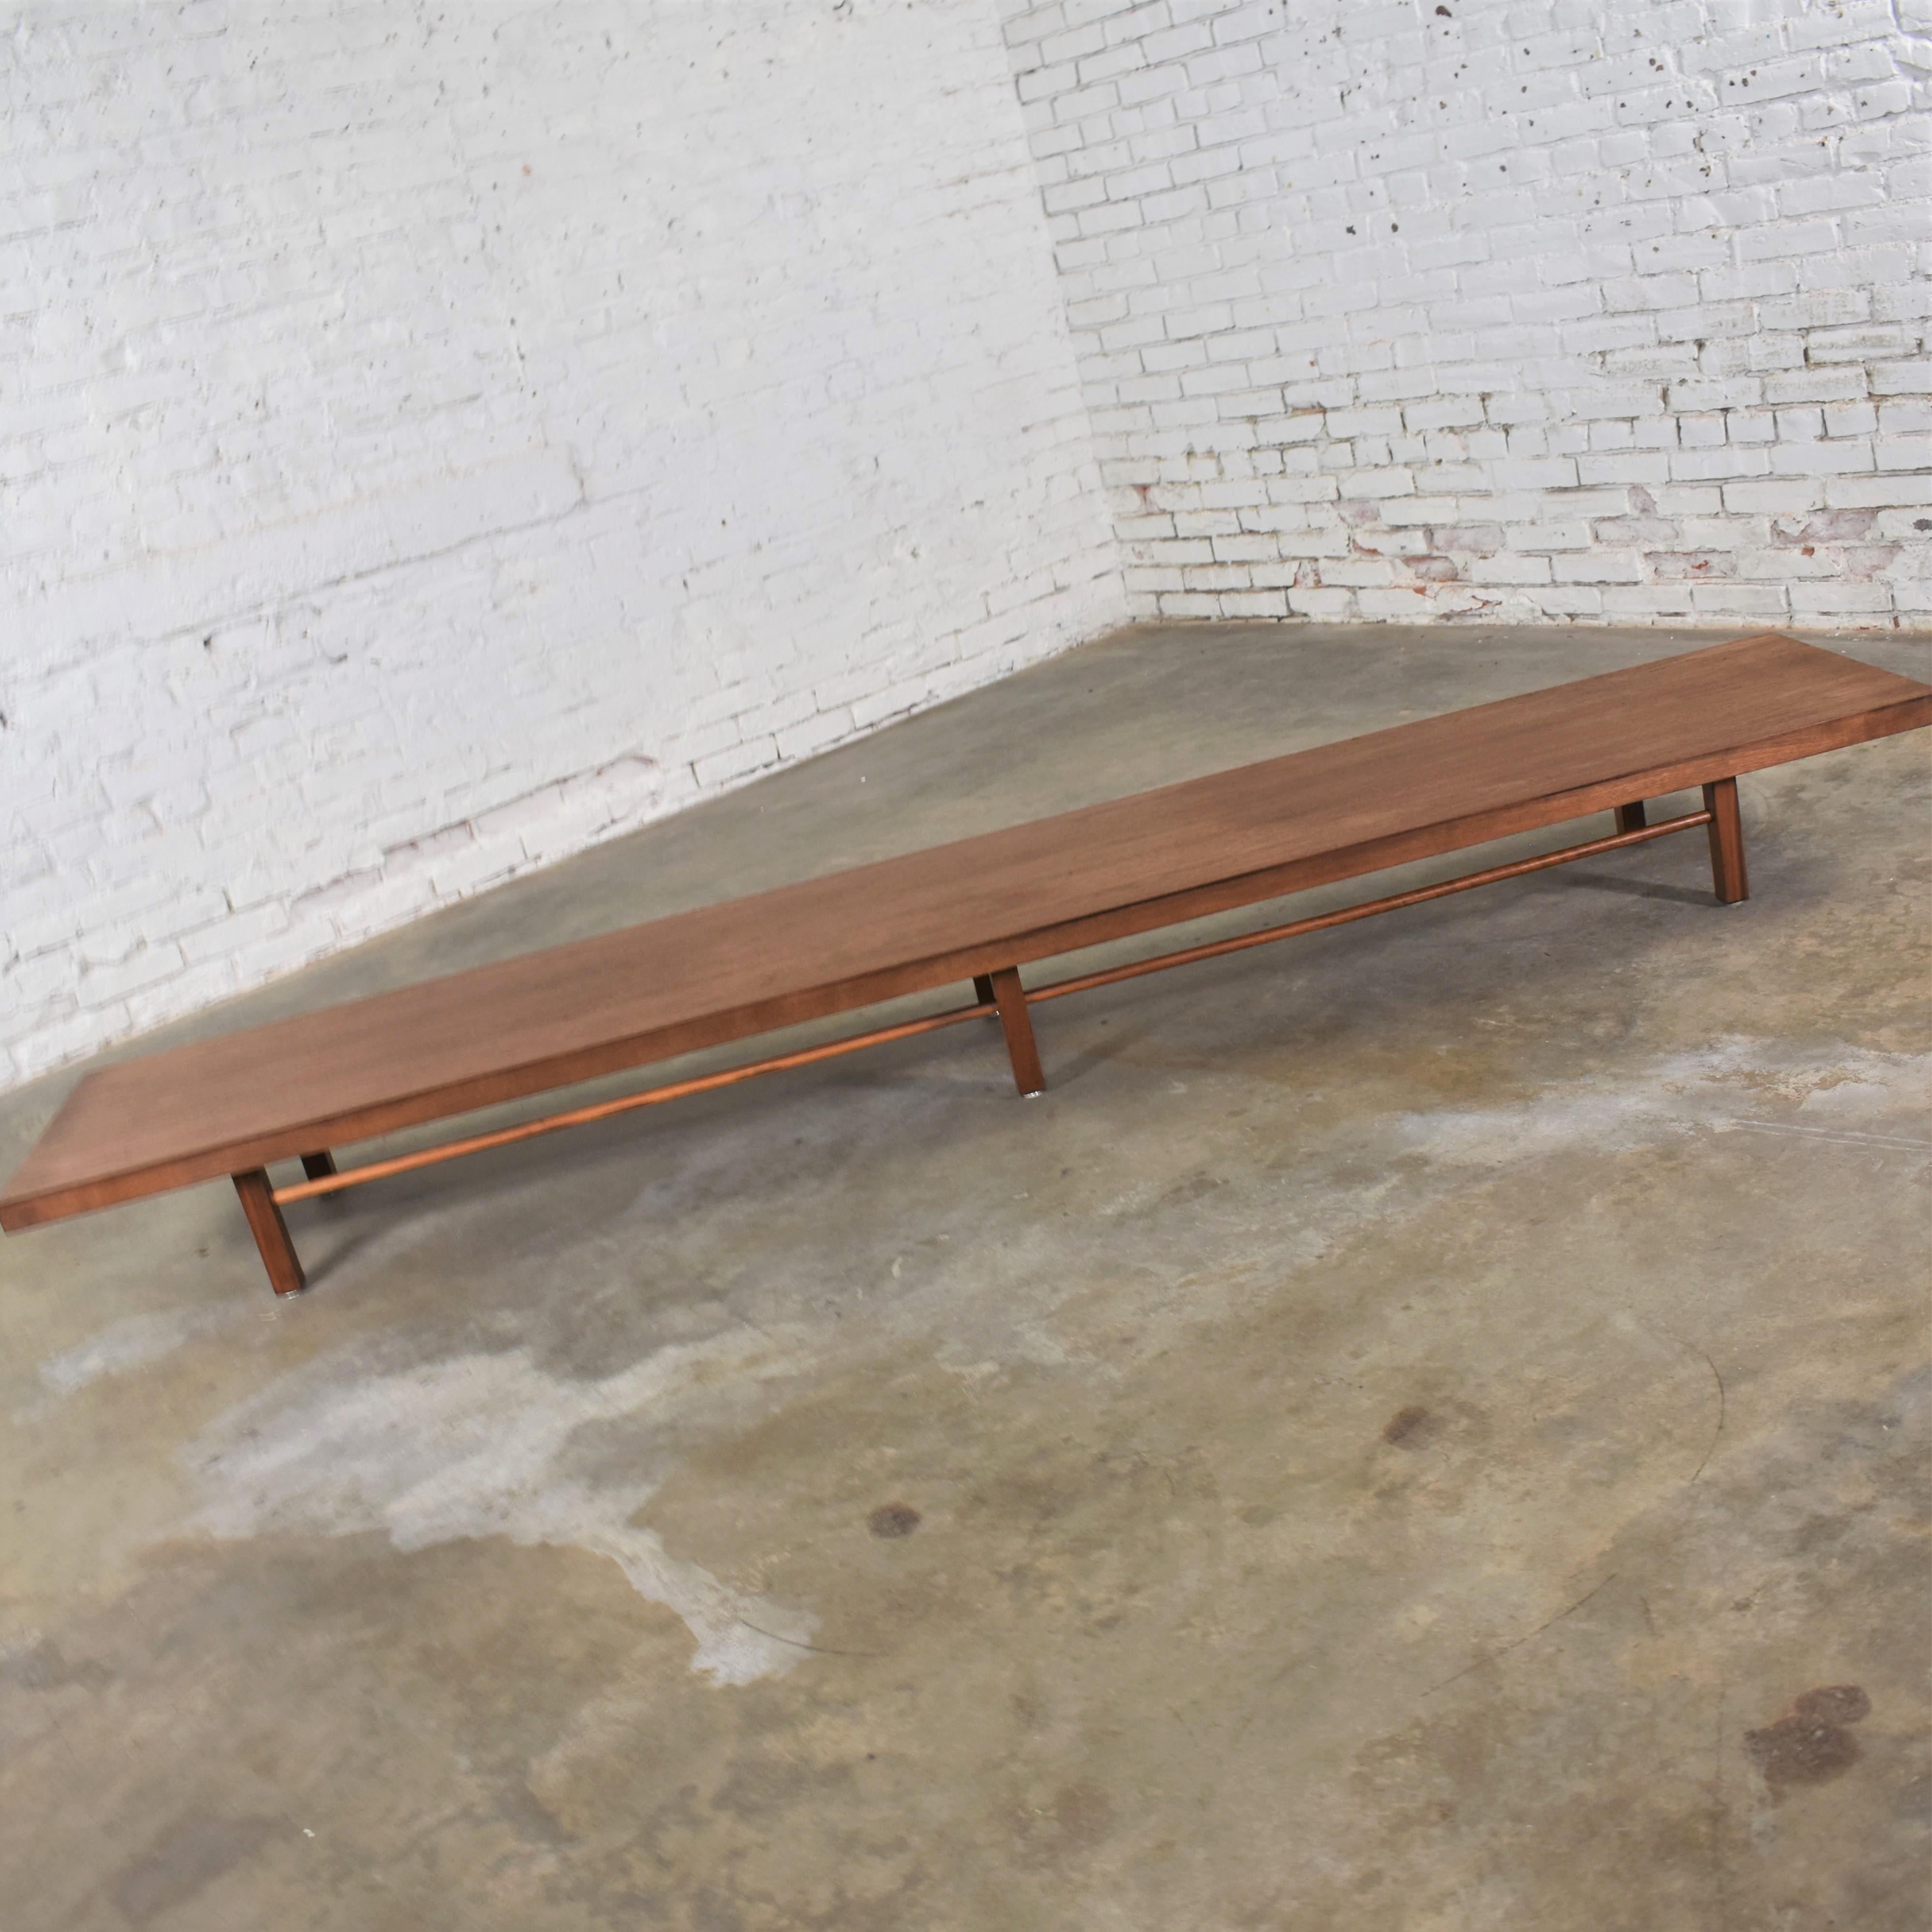 Handsome extra-long and low Mid-Century Modern coffee table or stretcher bench designed by Milo Baughman for Thayer Coggin. It is in wonderful restored condition. That does not mean it looks brand new. It retains a beautiful age patina that may